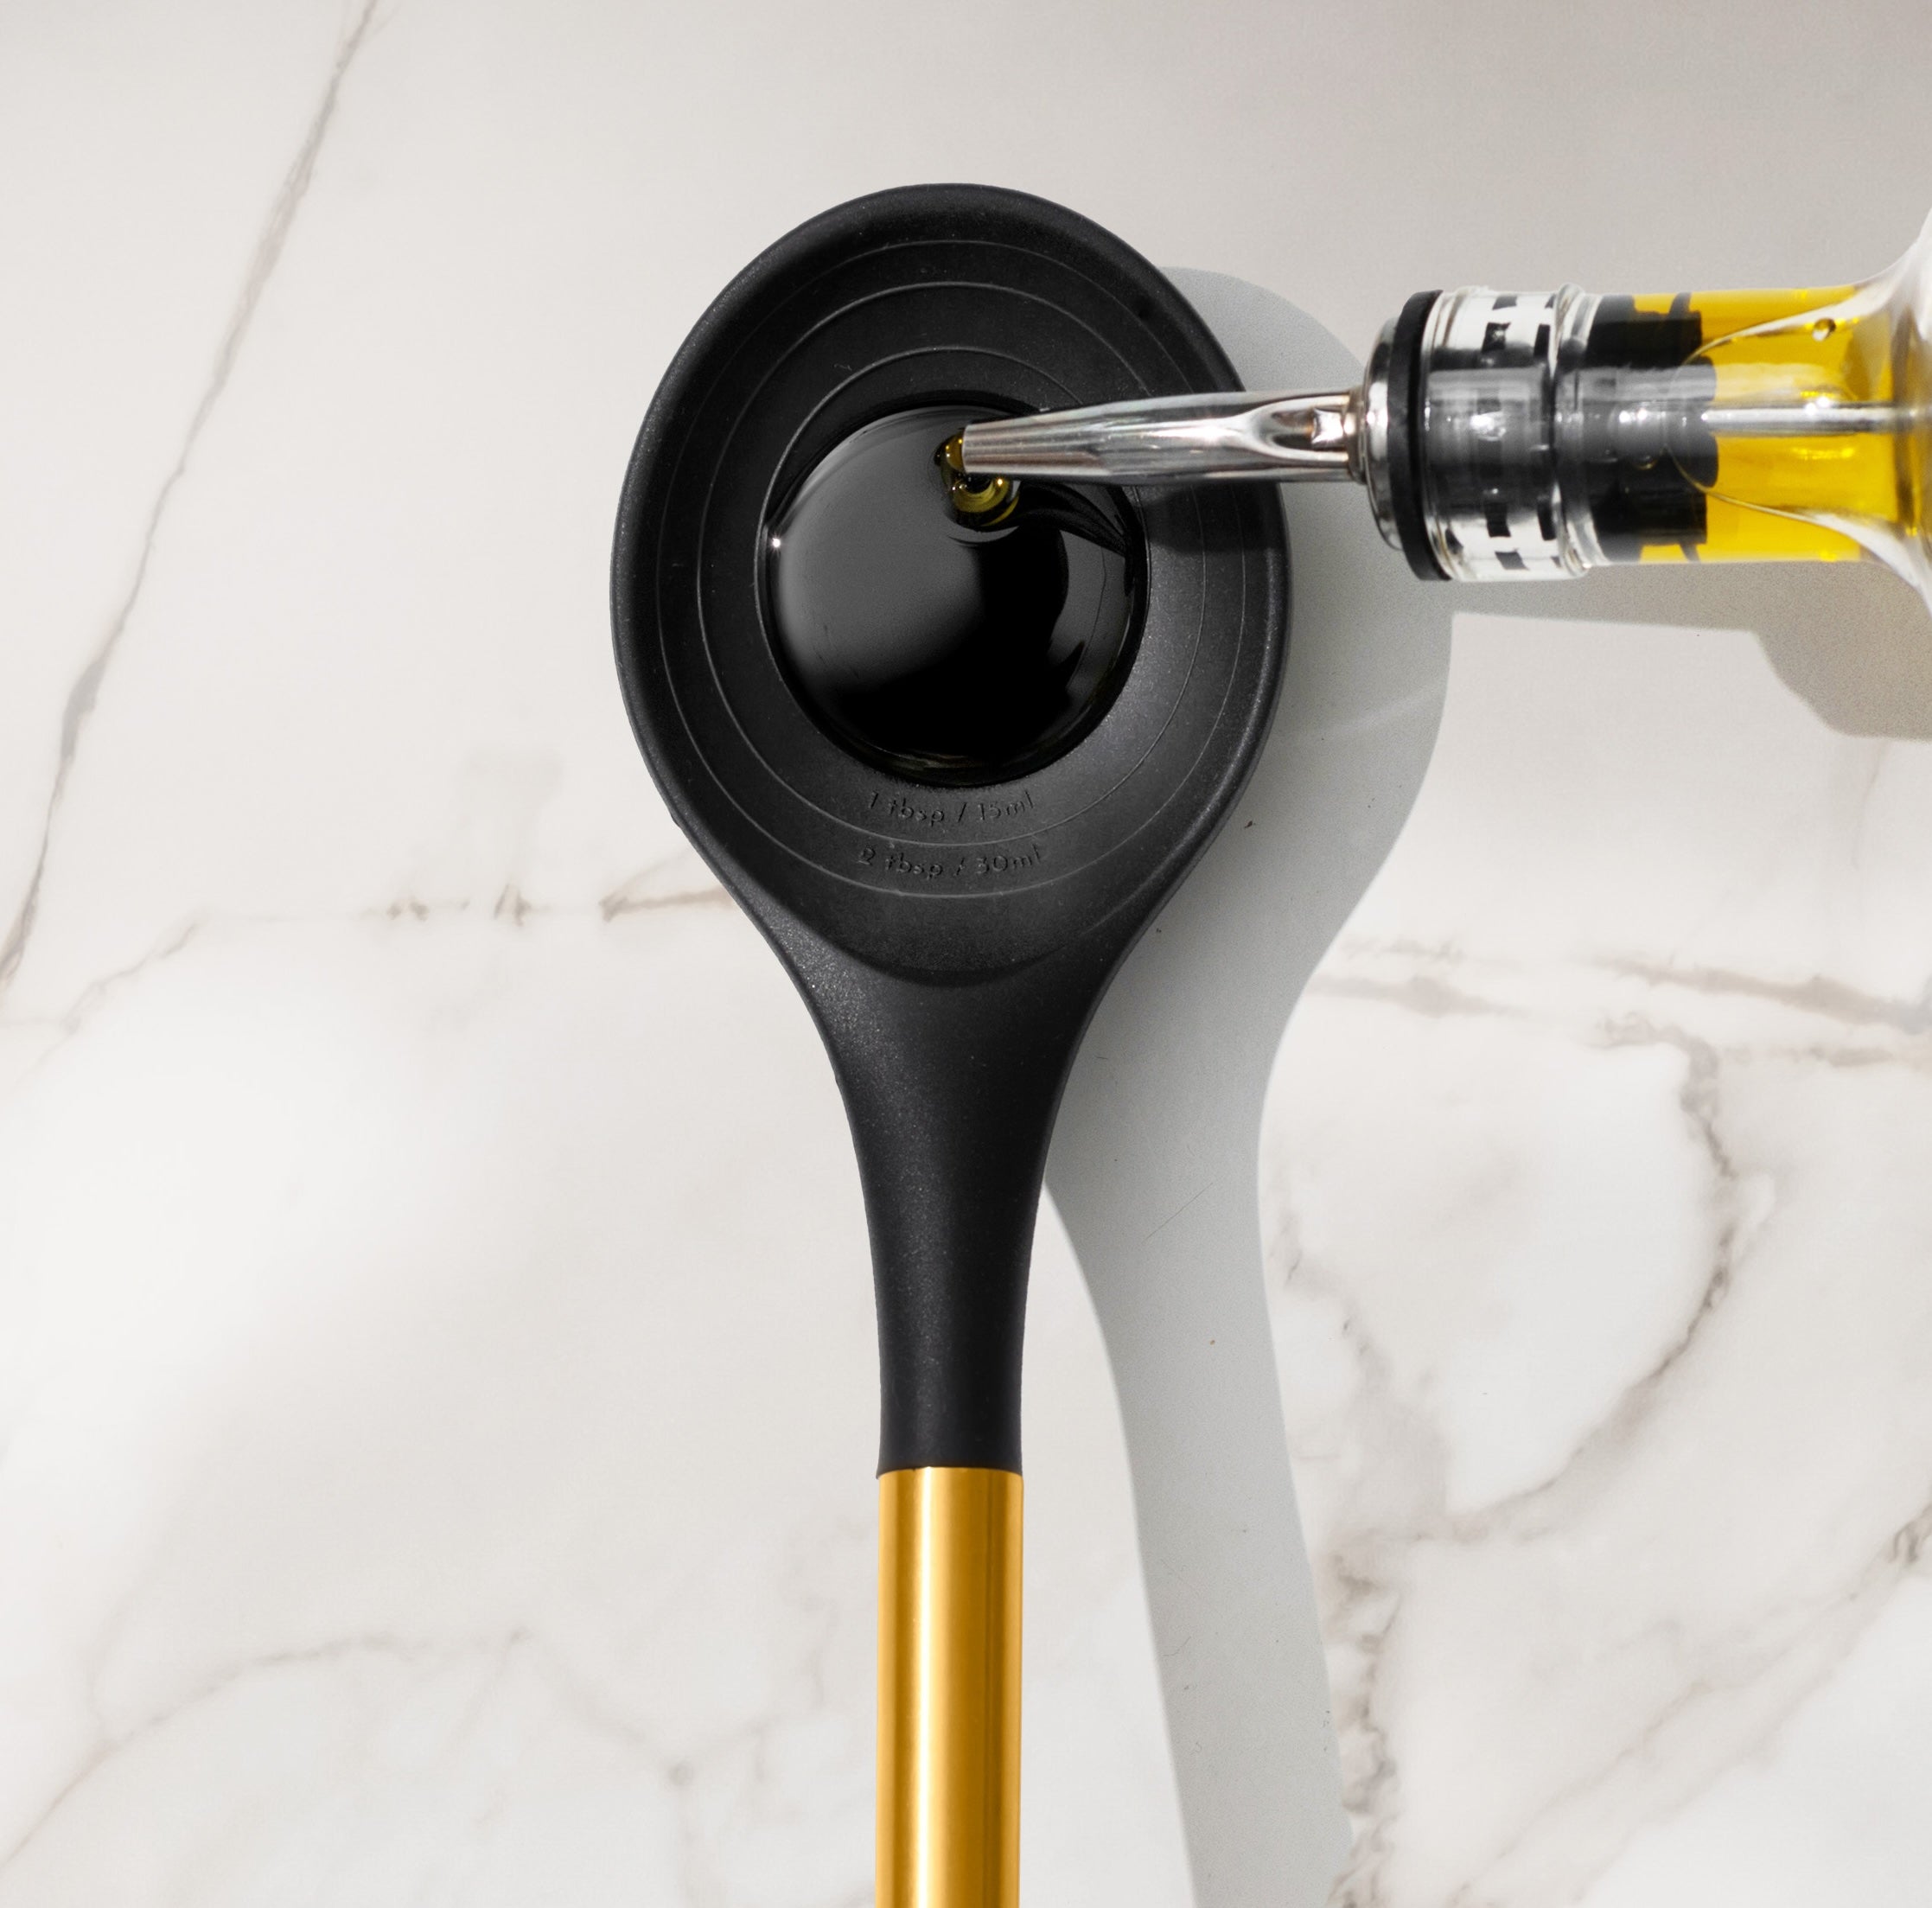 Black and Gold Kitchen Tools Set